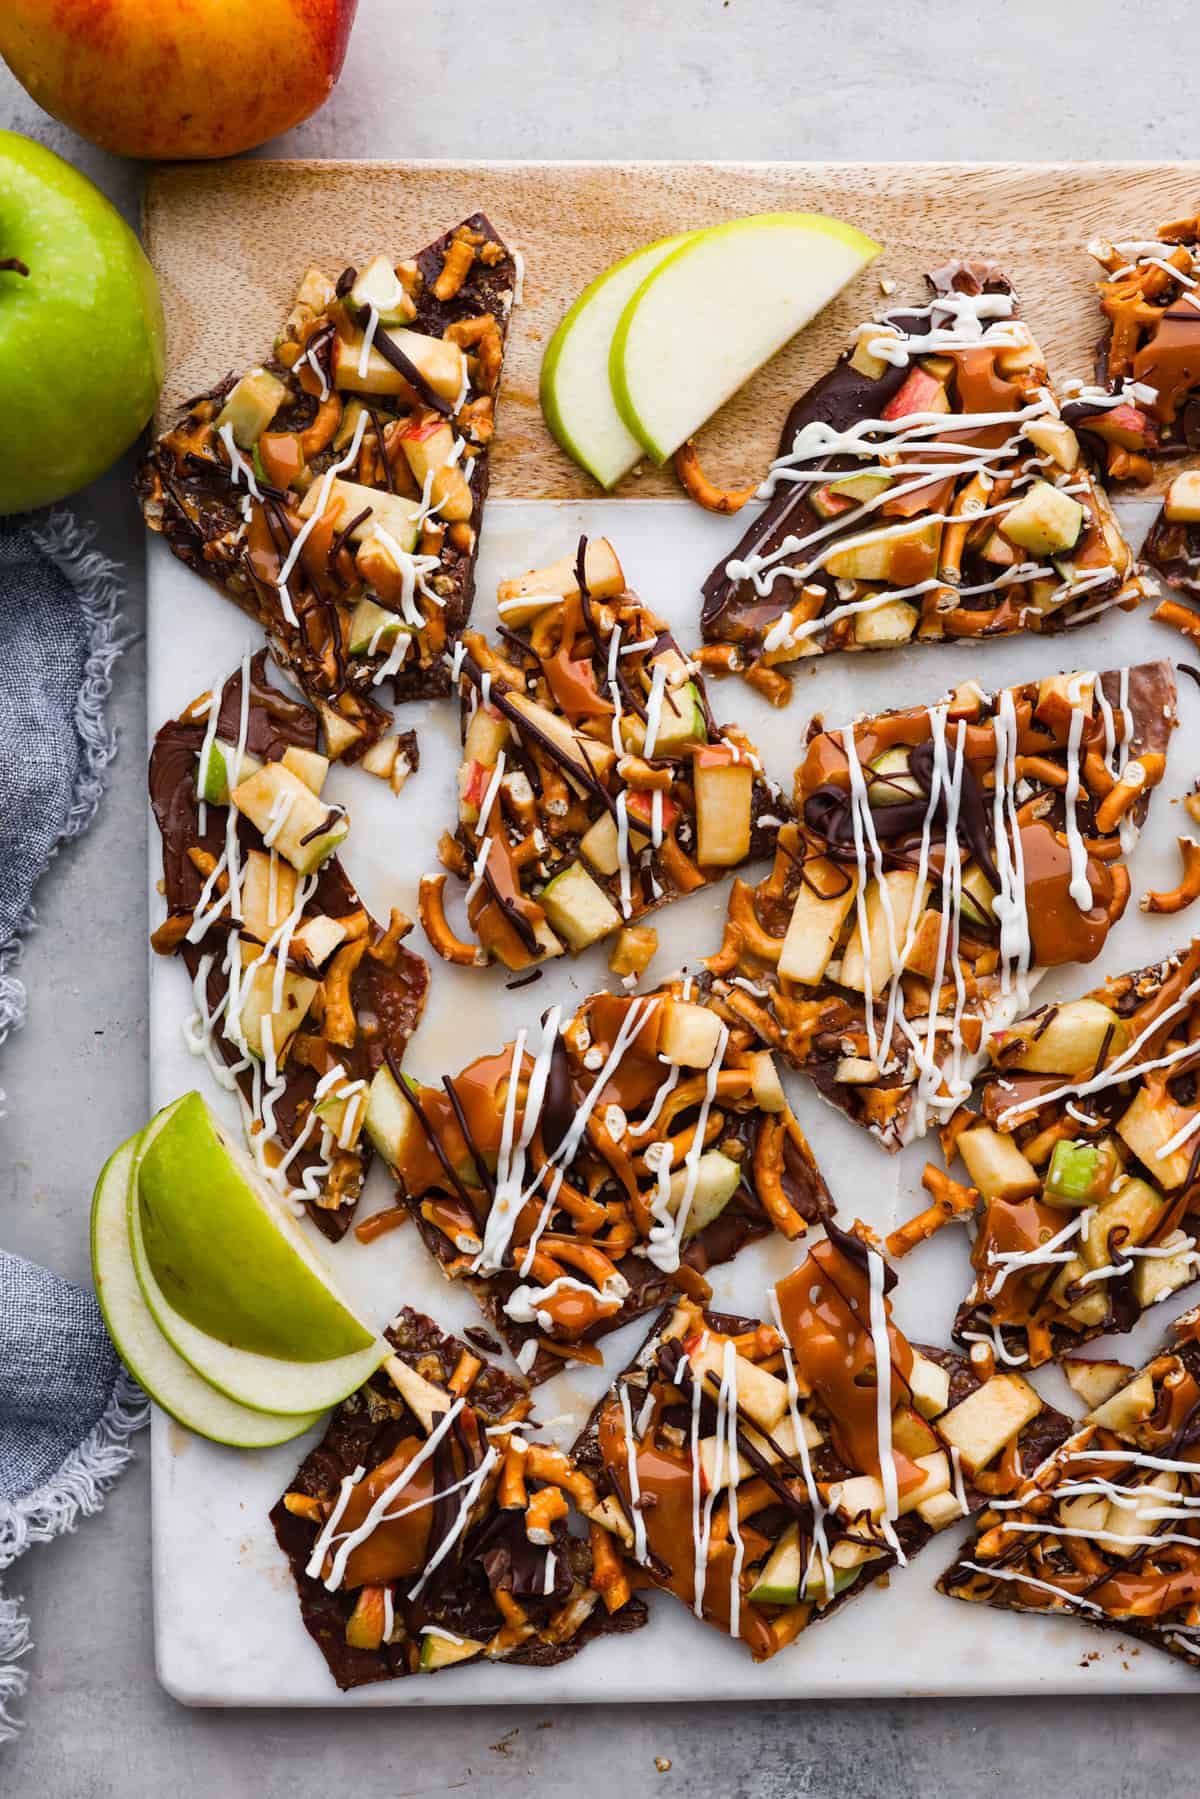 Top-down view of caramel apple bark on a wooden board, broken into pieces.